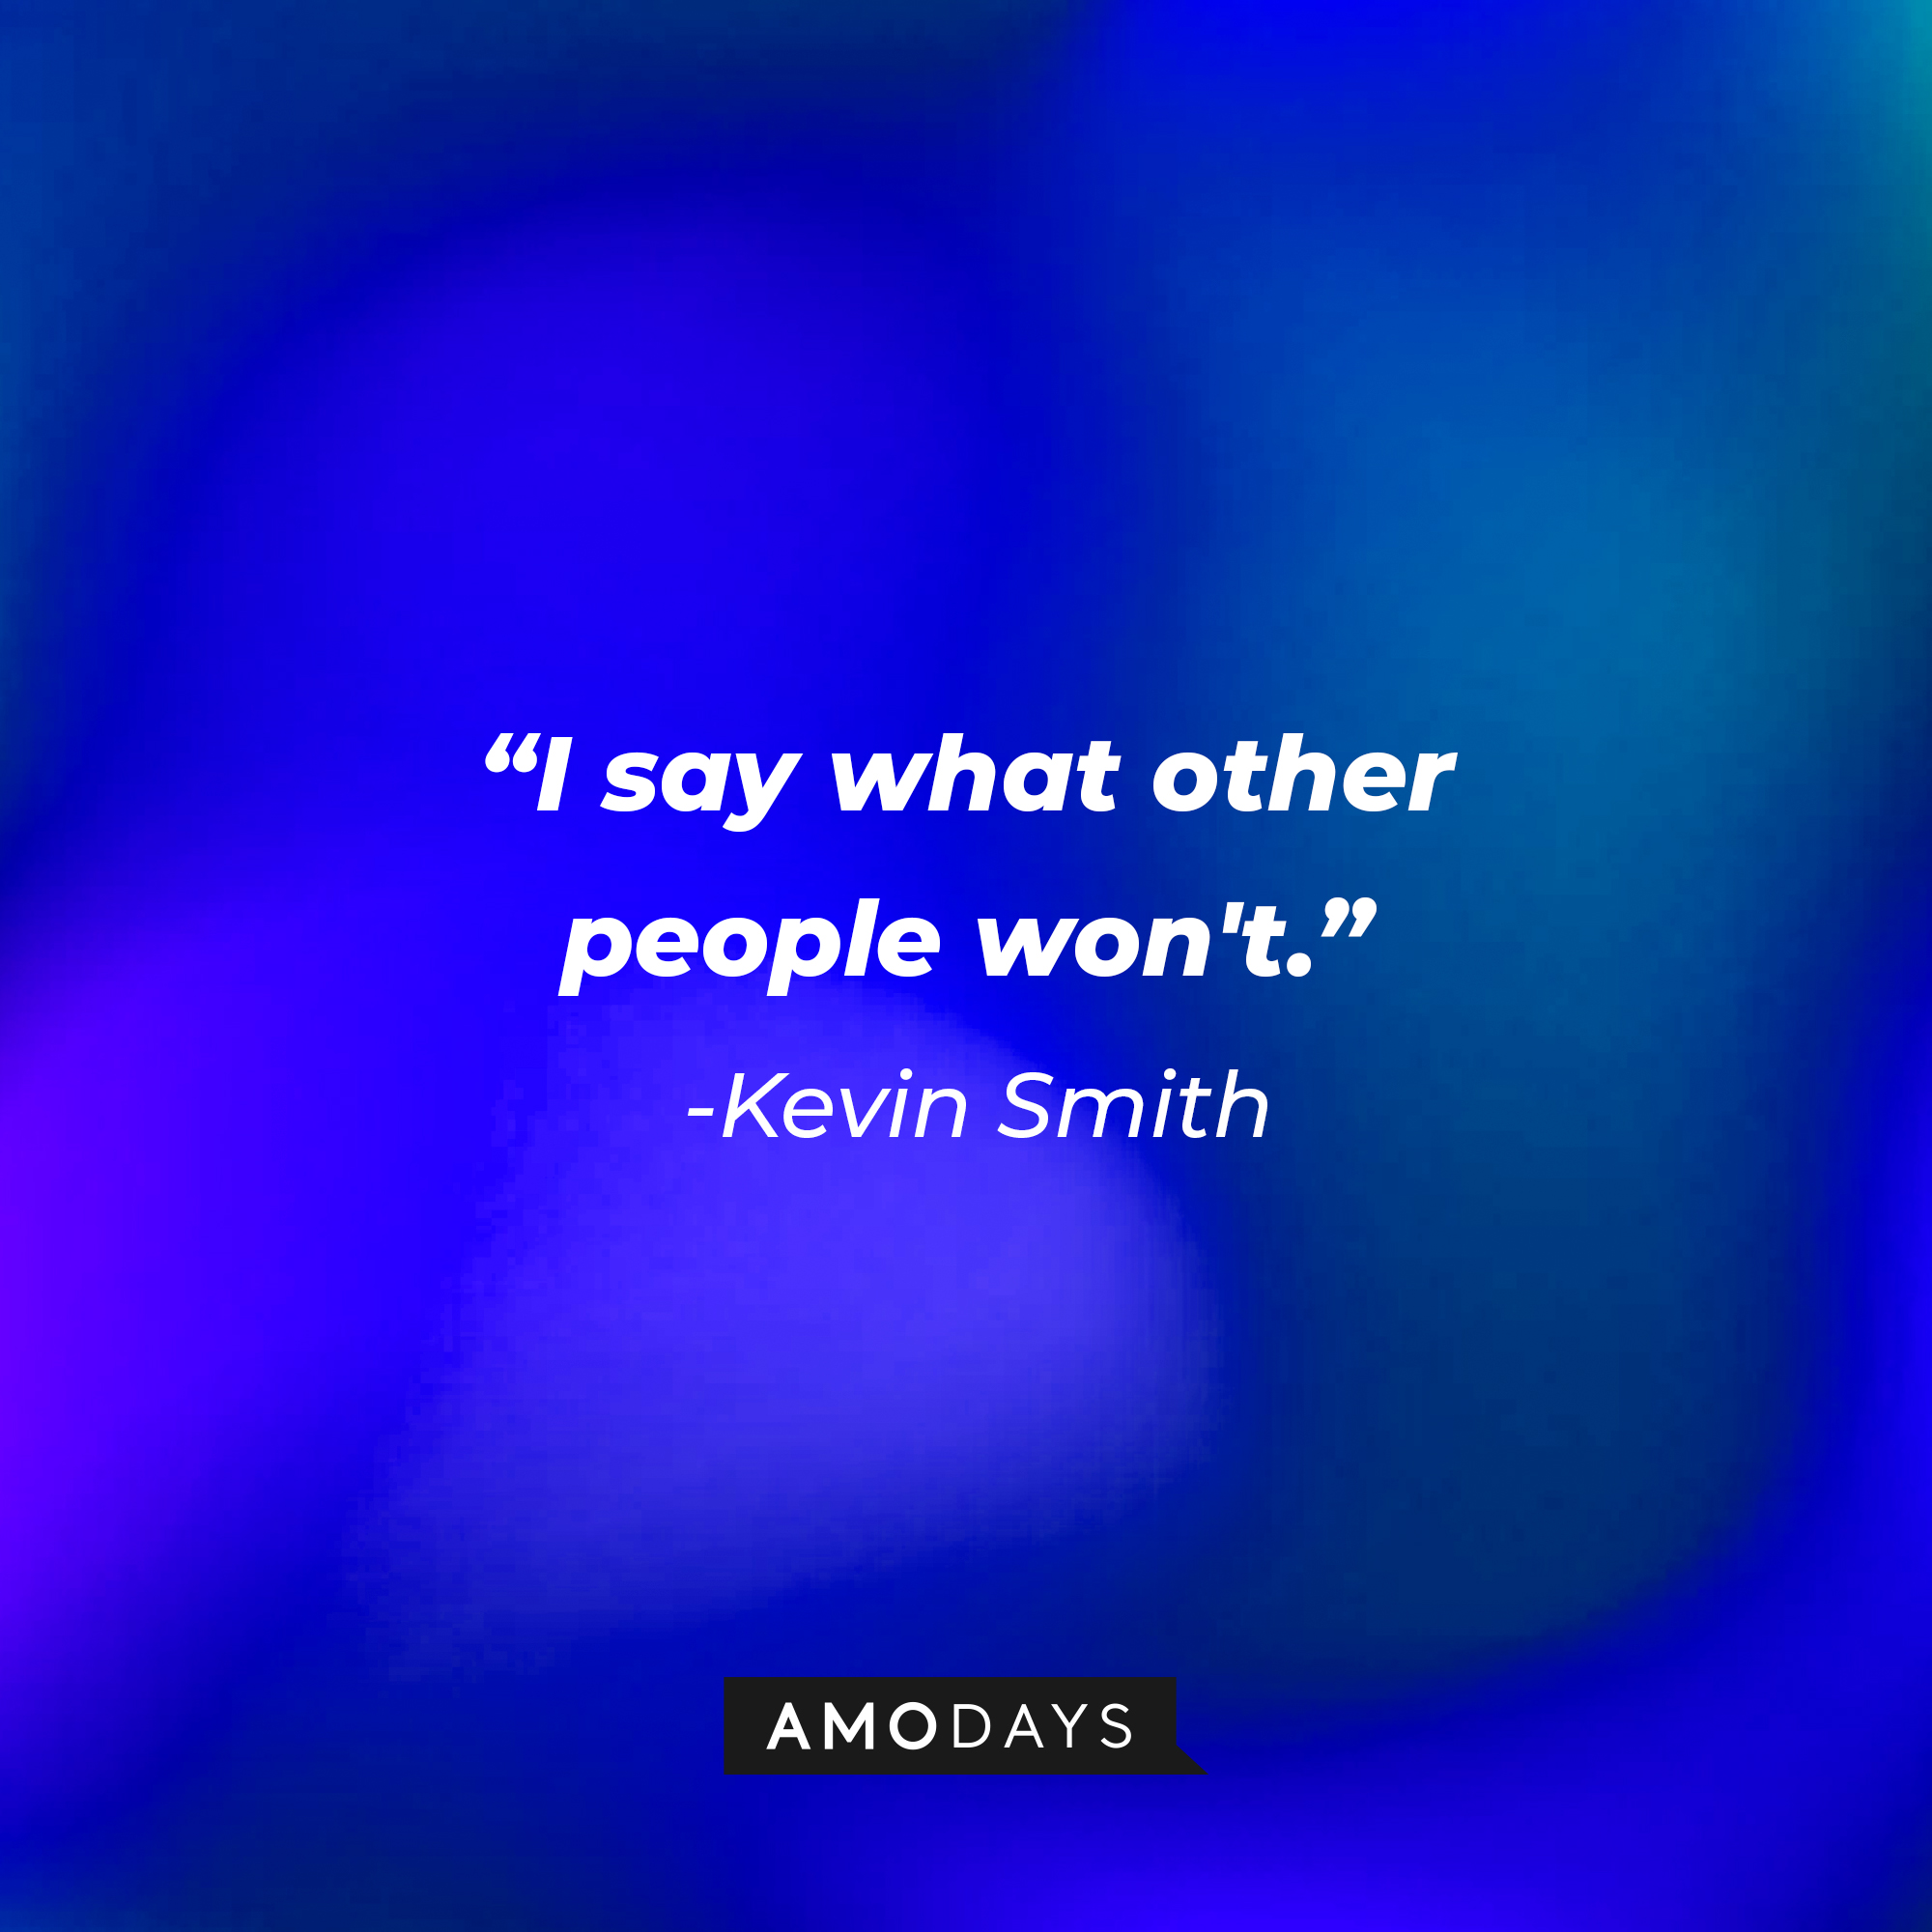 Kevin Smith’s quote: “I say what other people won't.” | Source: AmoDays